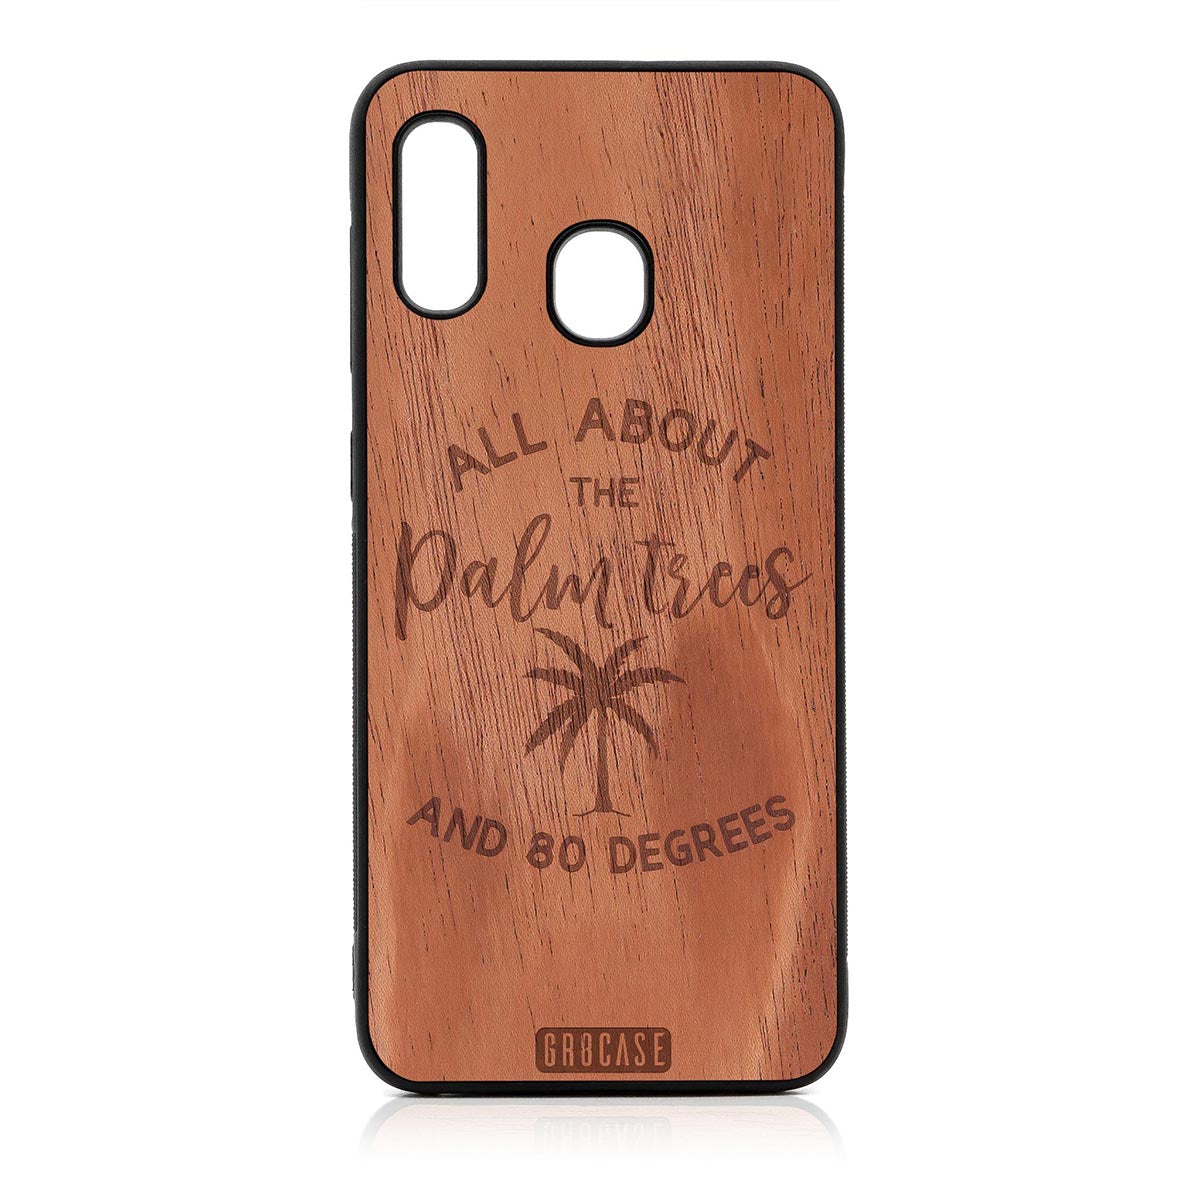 All About The Palm Trees and 80 Degrees Design Wood Case For Samsung Galaxy A20 by GR8CASE